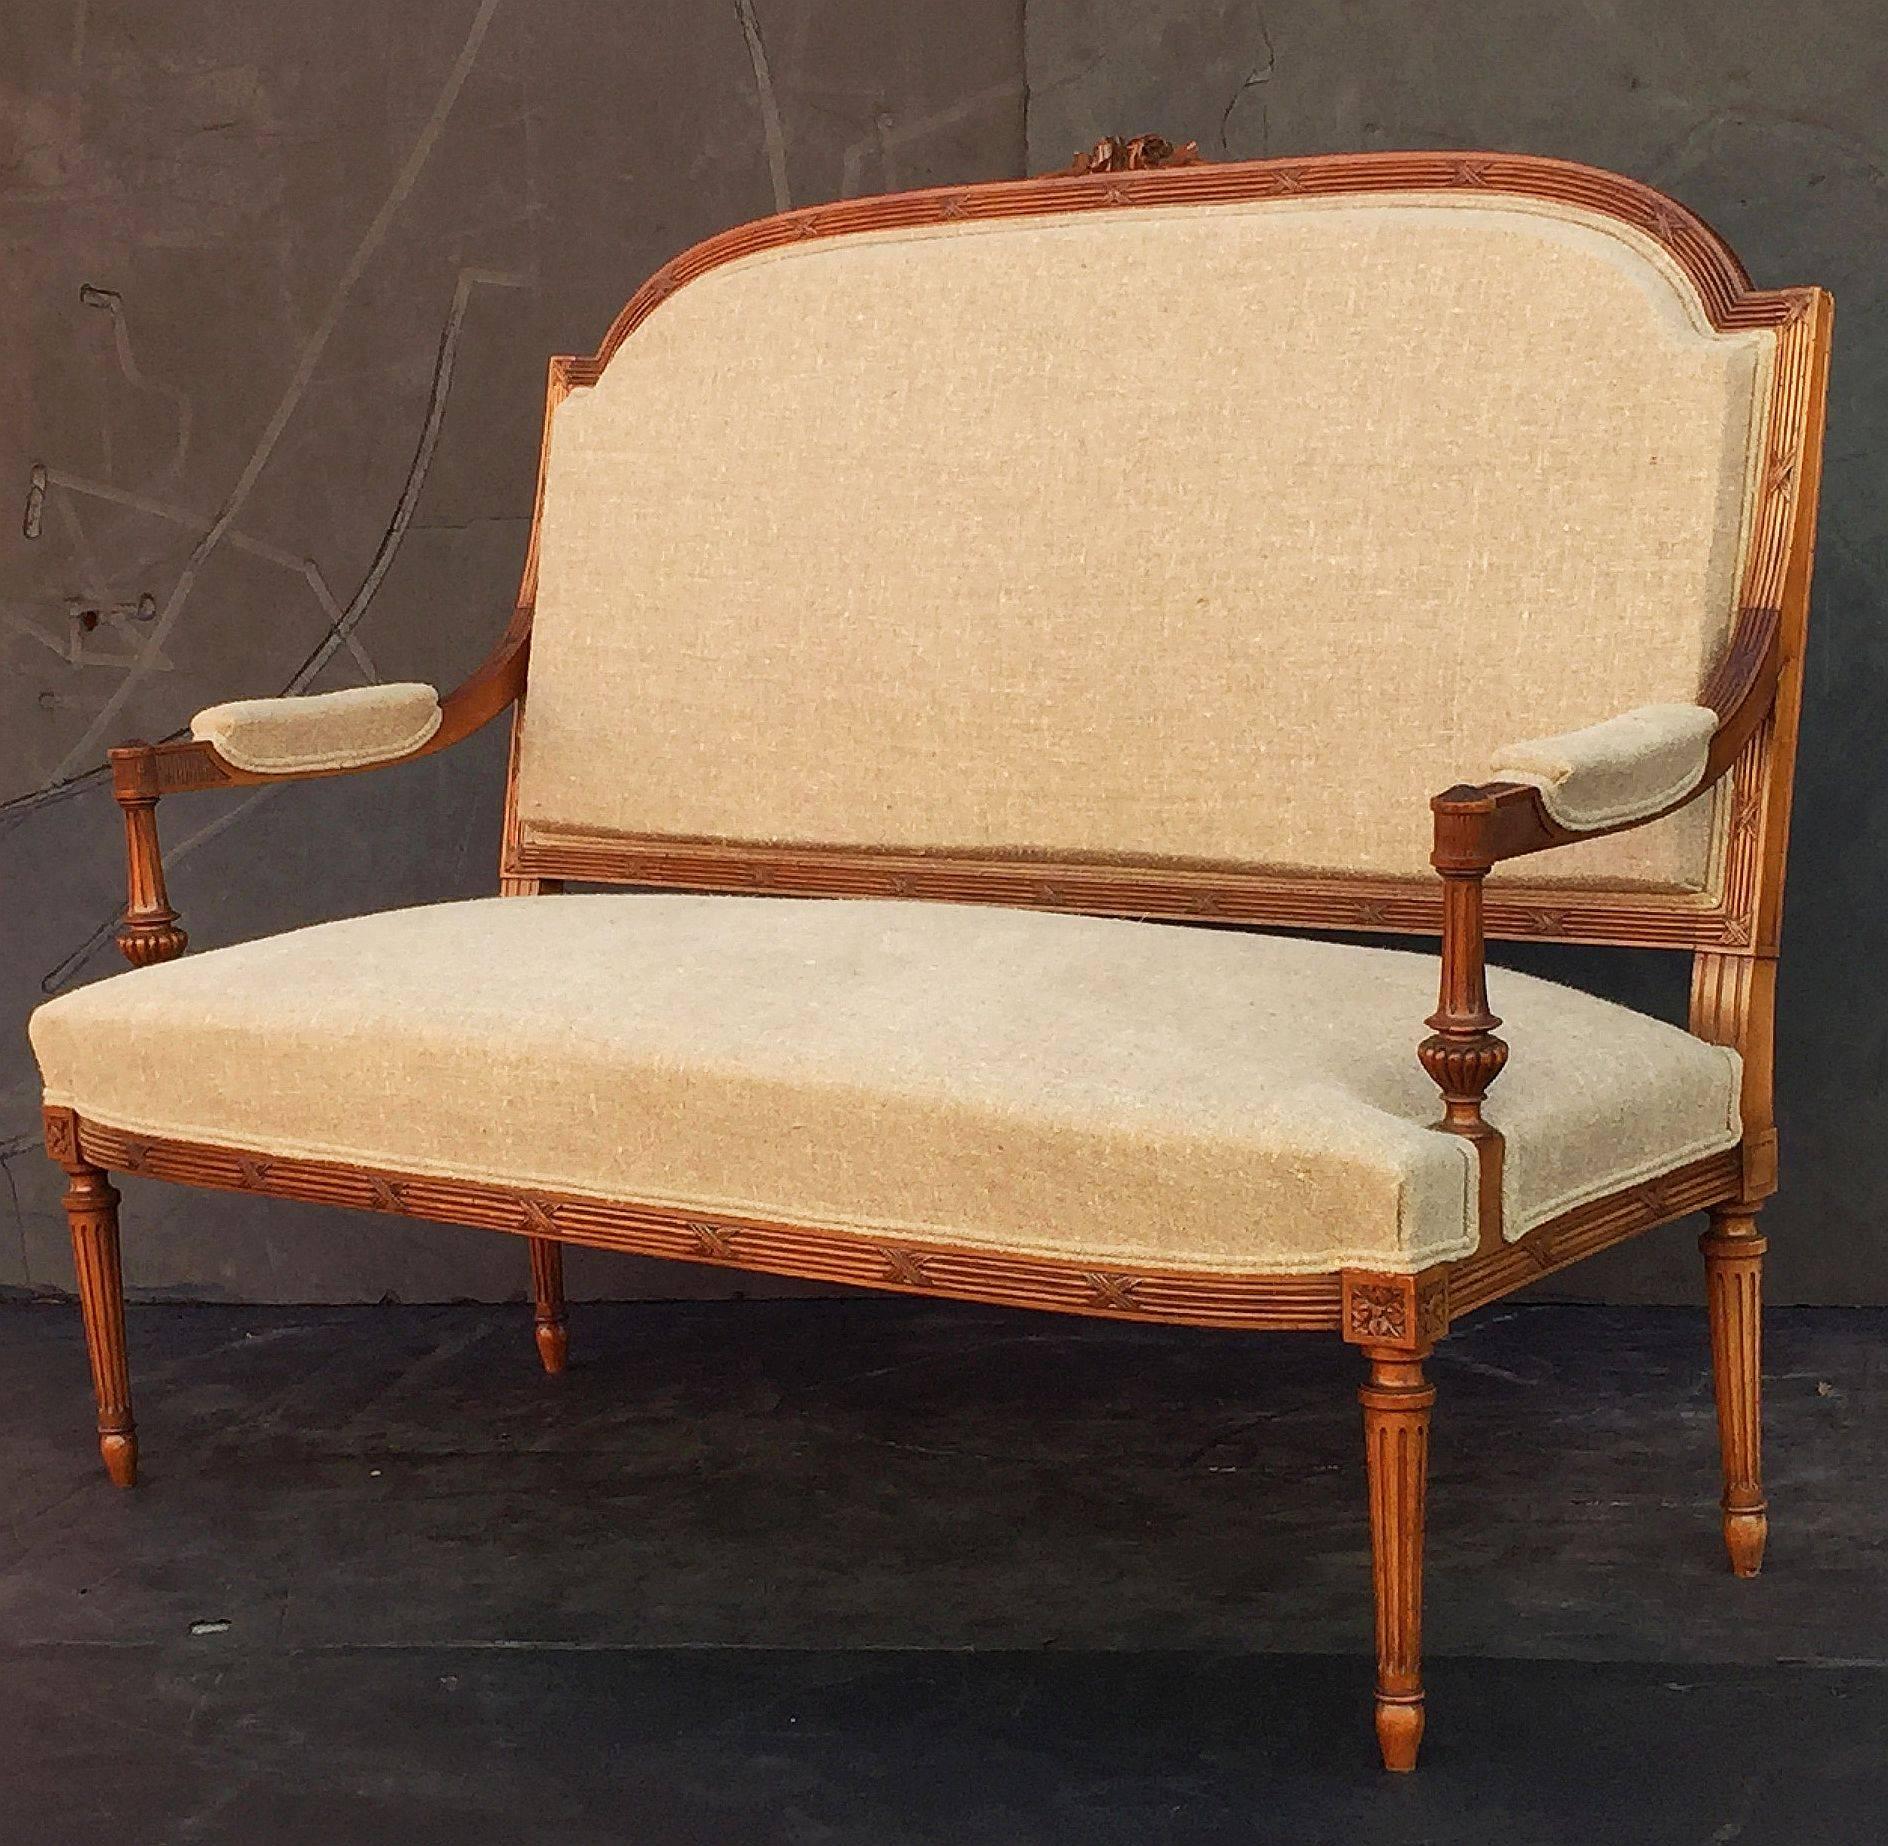 A handsome French settee featuring an upholstered back, arms, and seat on a frame of carved walnut, with foliate and ribbon accents, and  standing on fluted column legs.